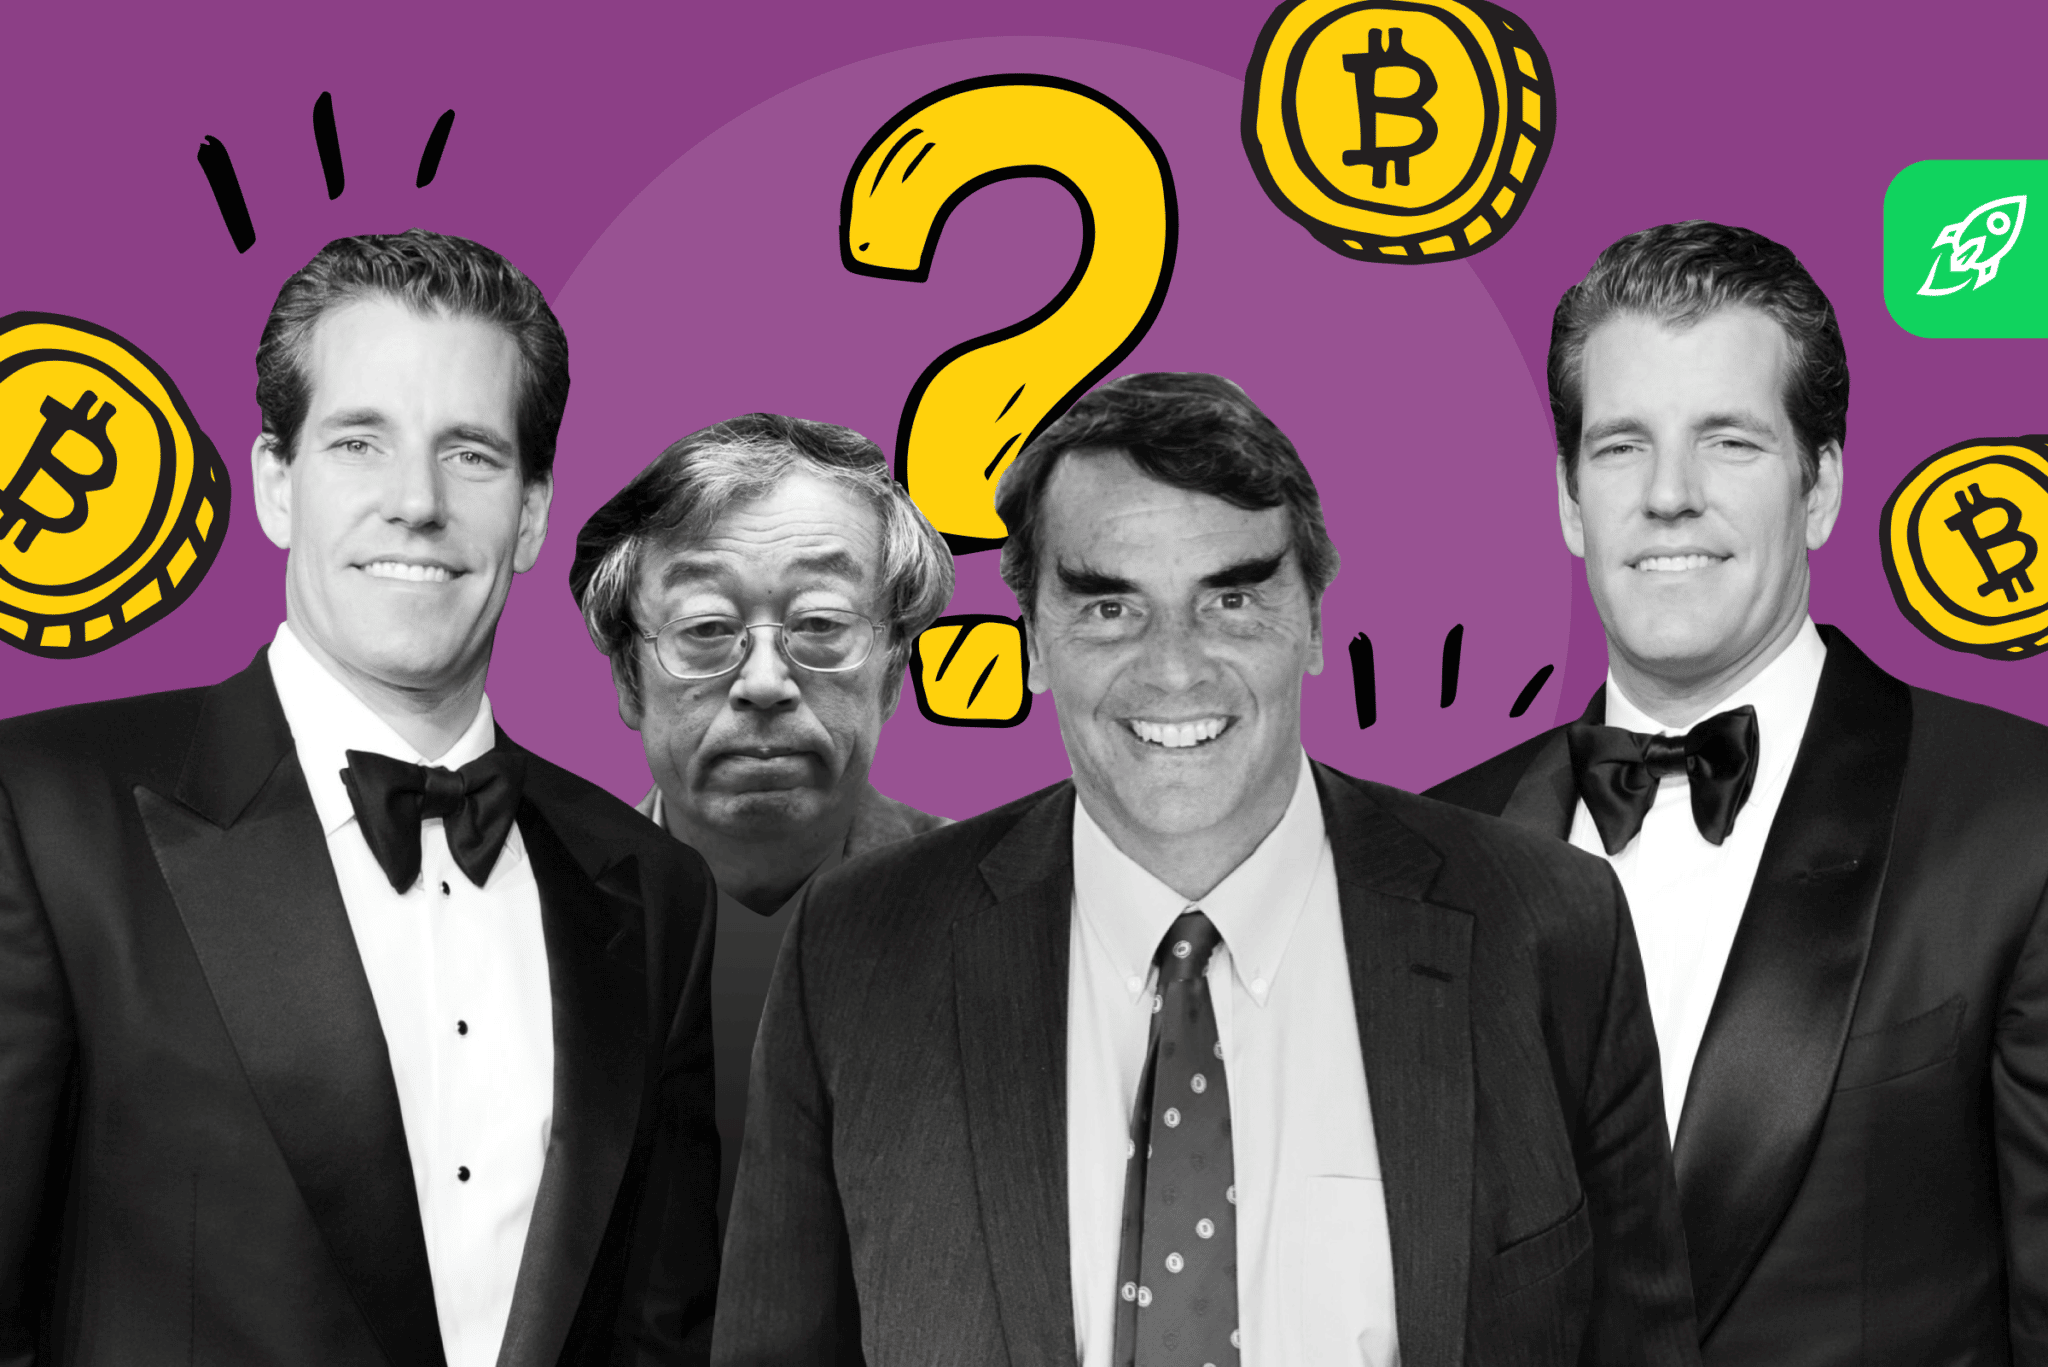 who owns the most bitcoins in the world